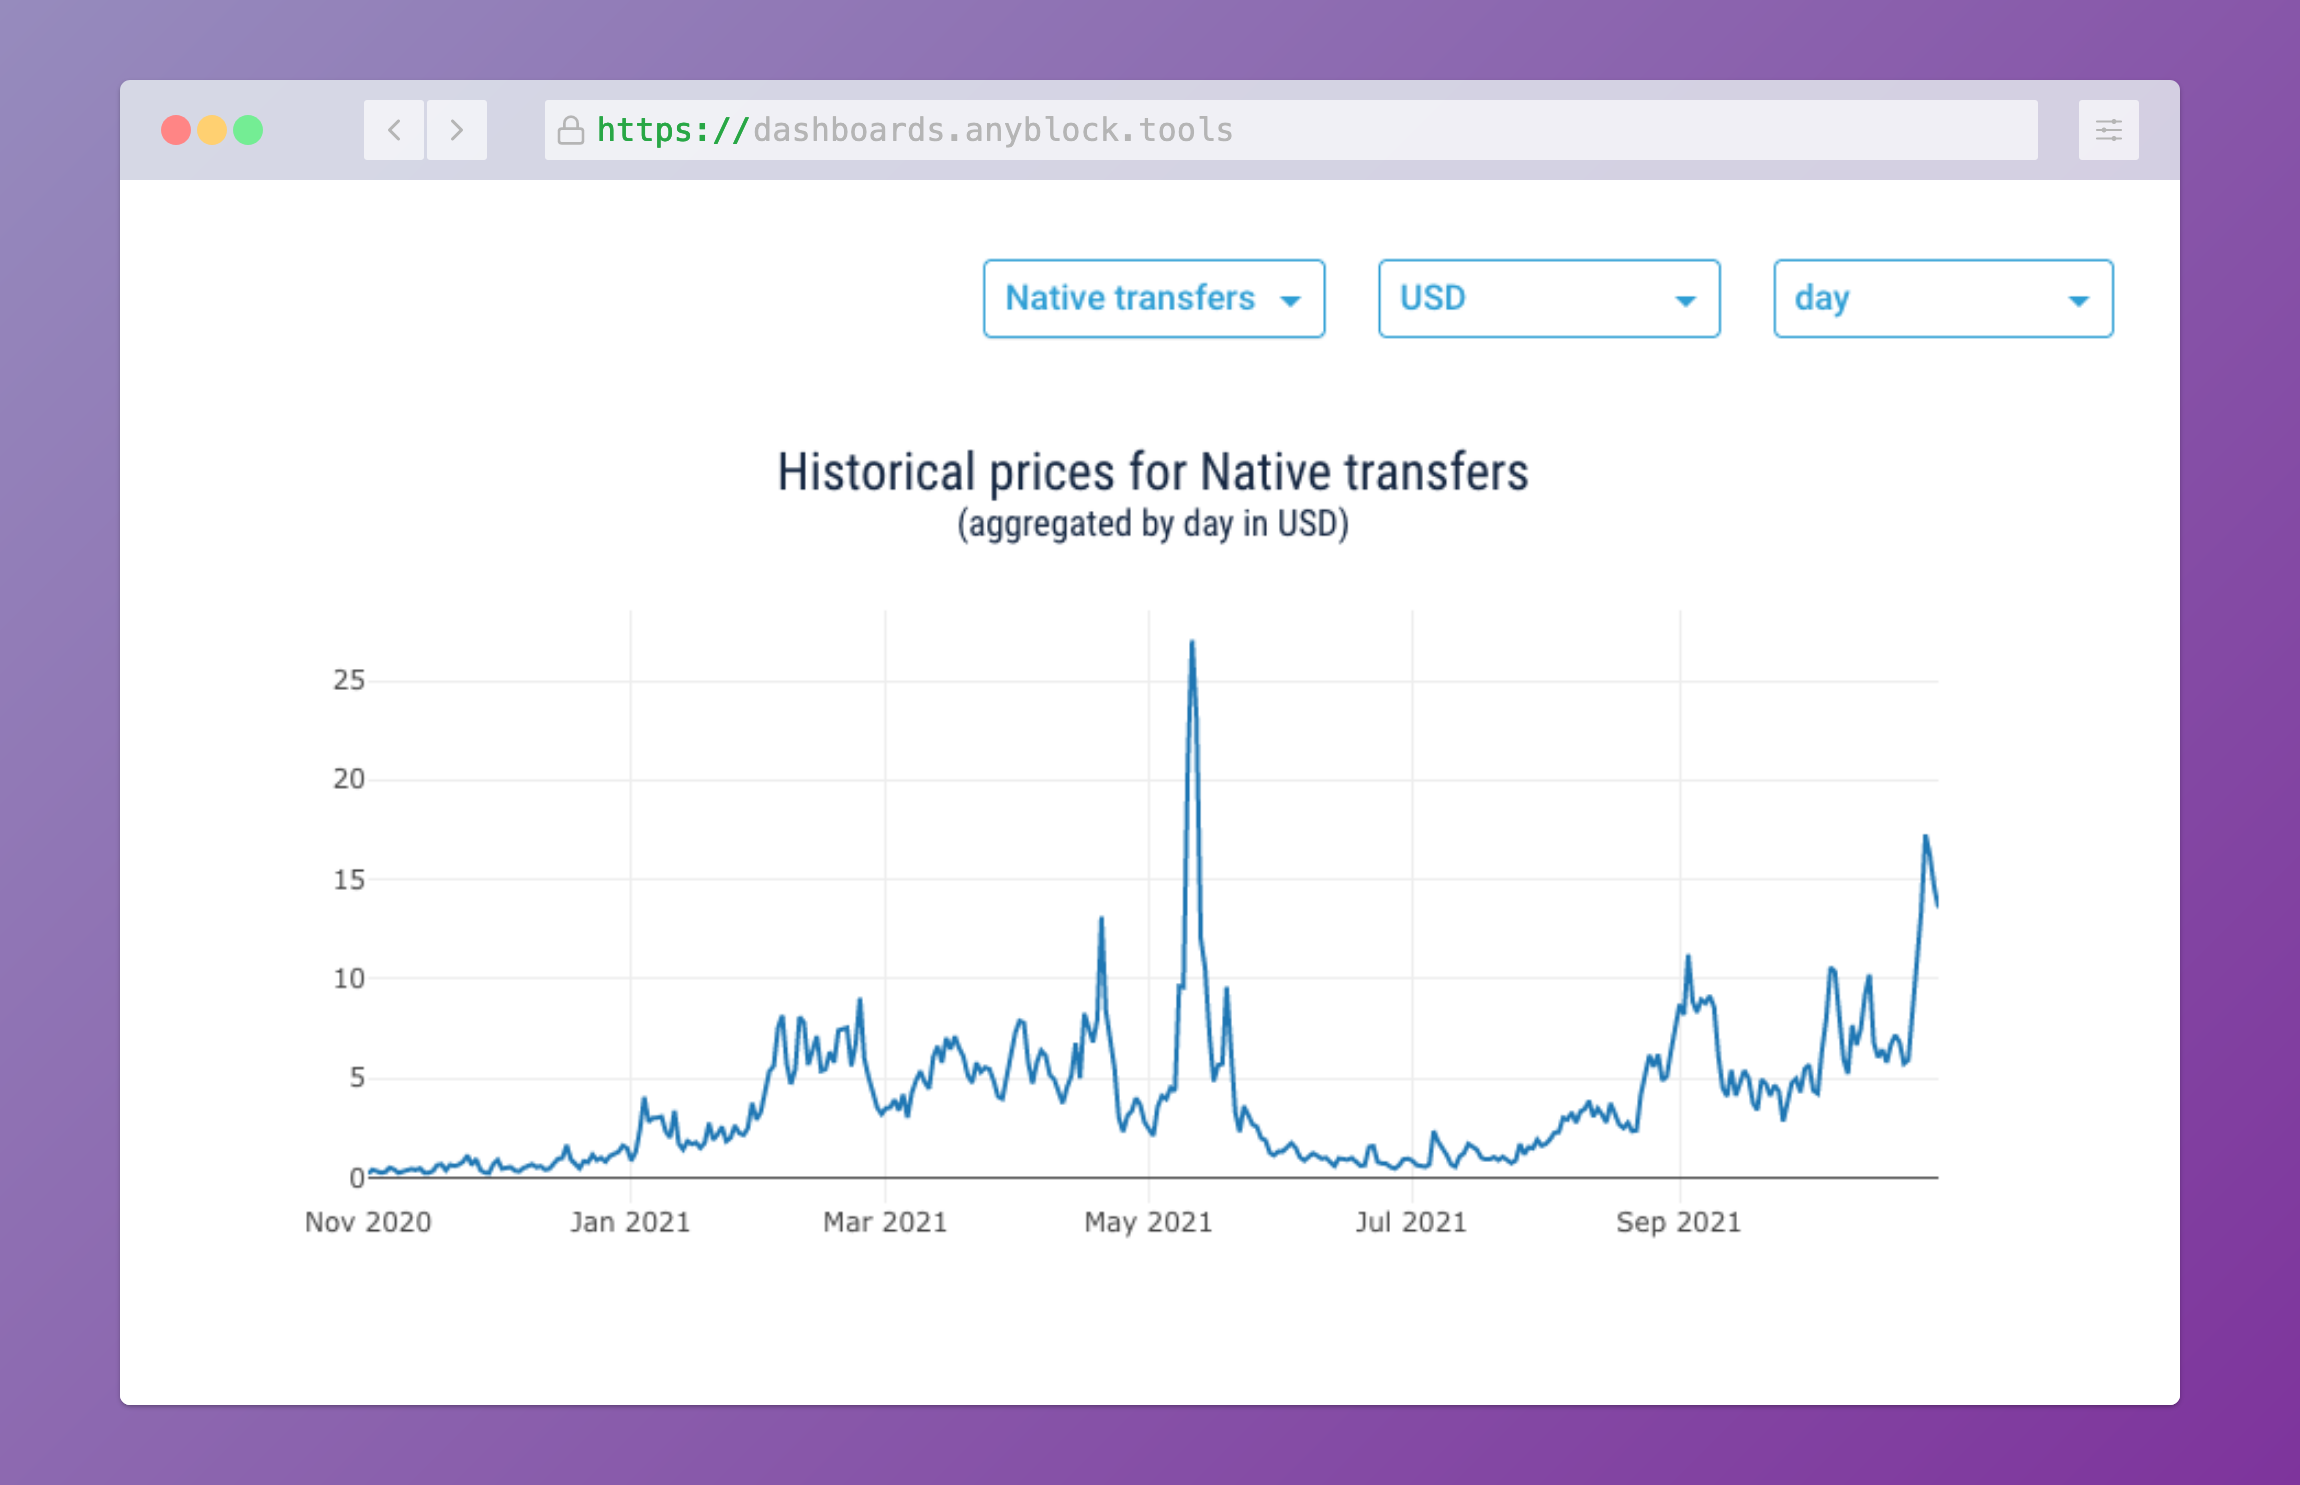 Time series plot for historical pricing of Ethereum transfers